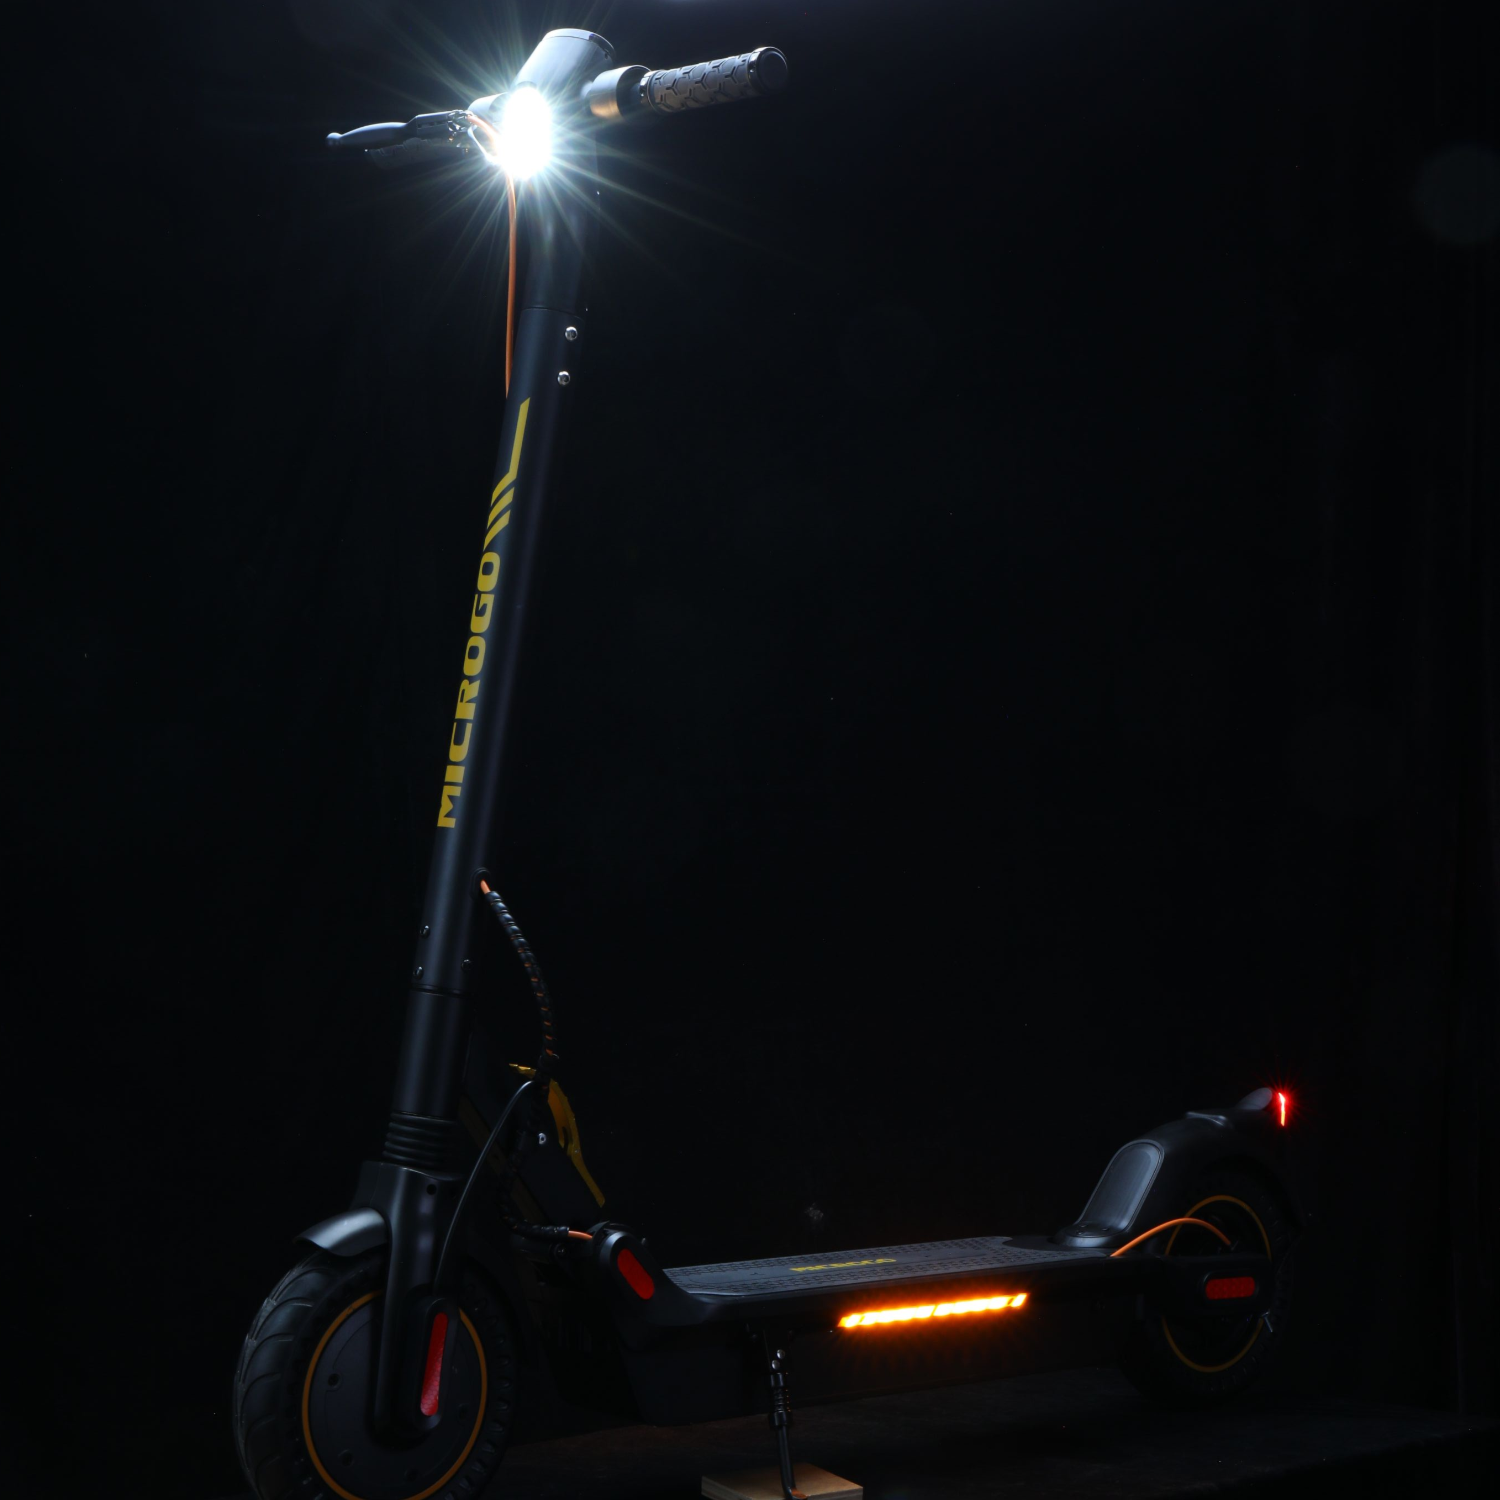 sit down electric scooter for adults